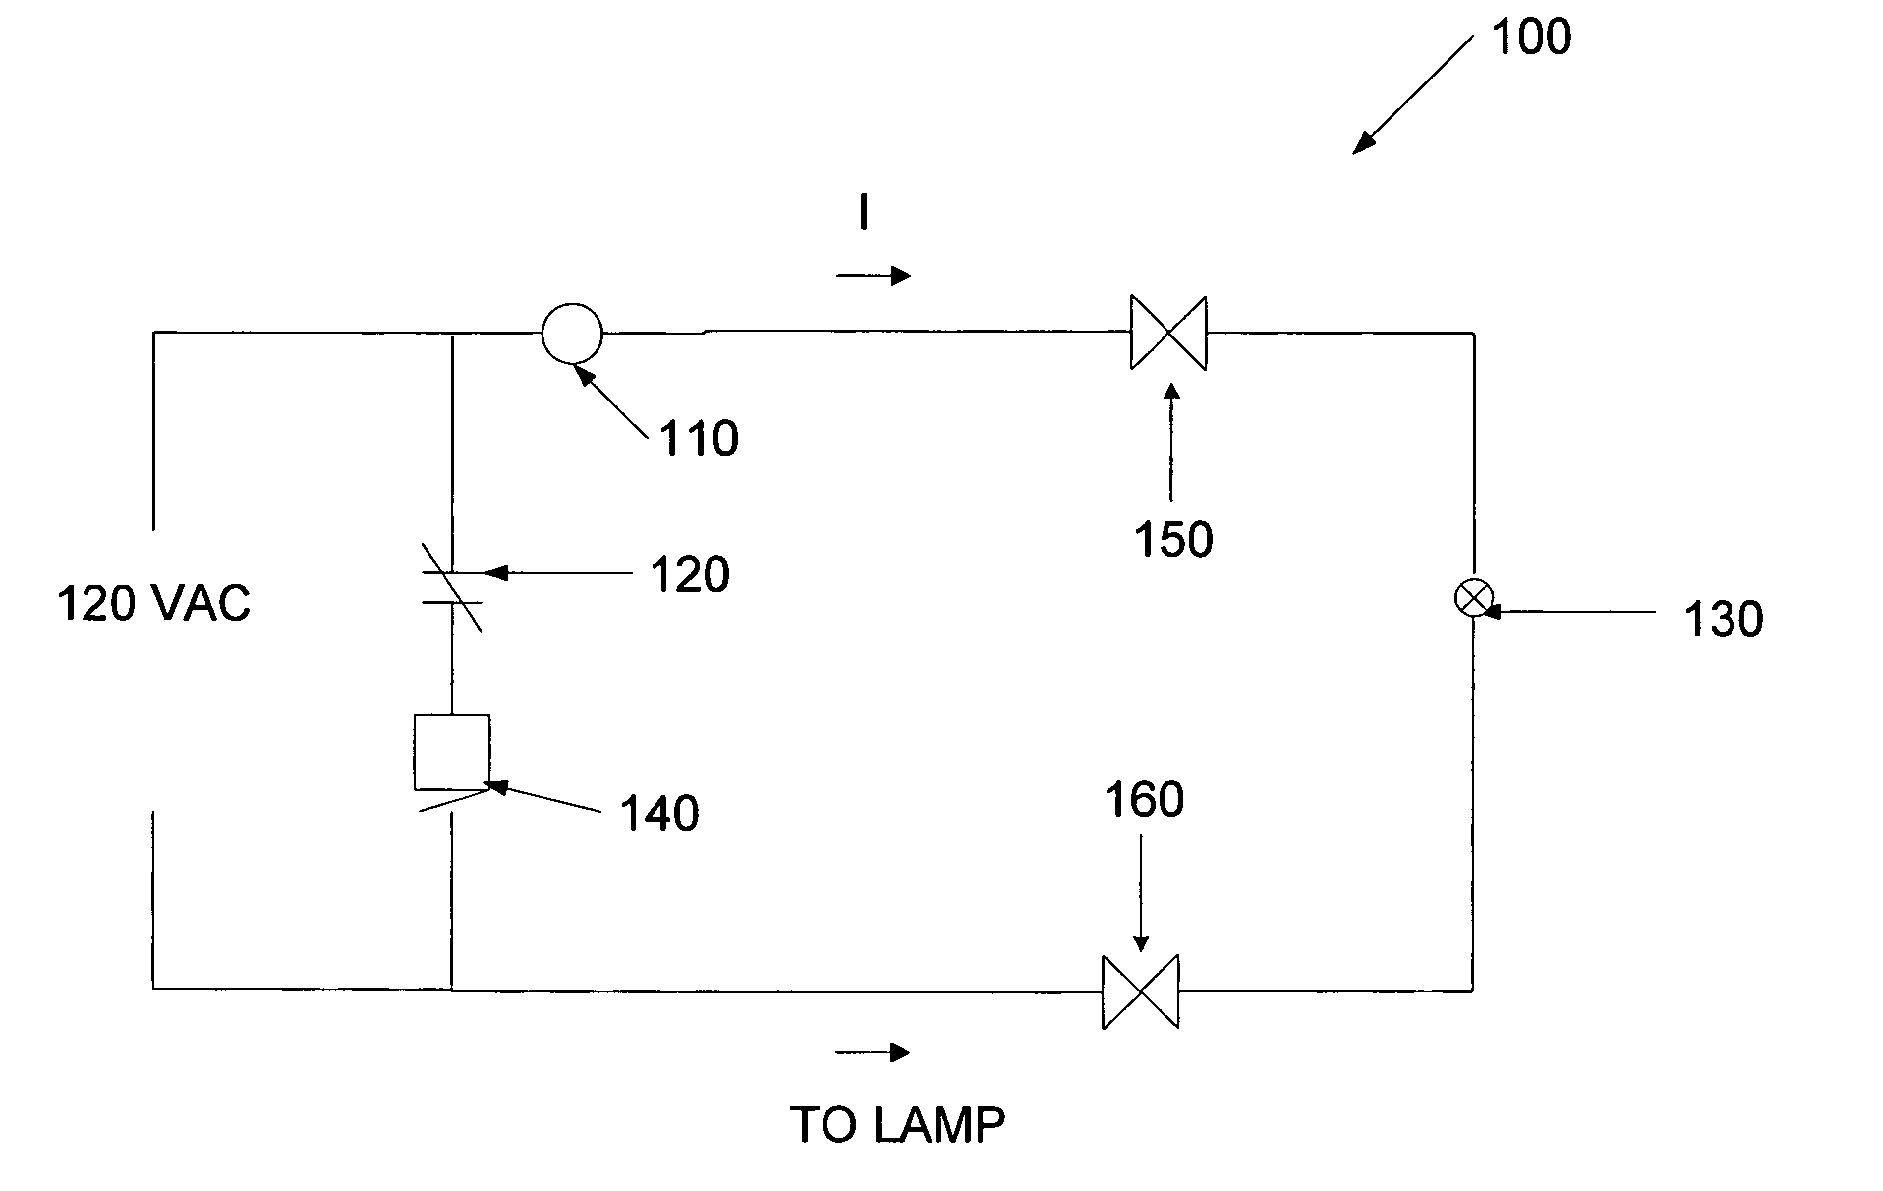 Lamp or LED failure monitoring system